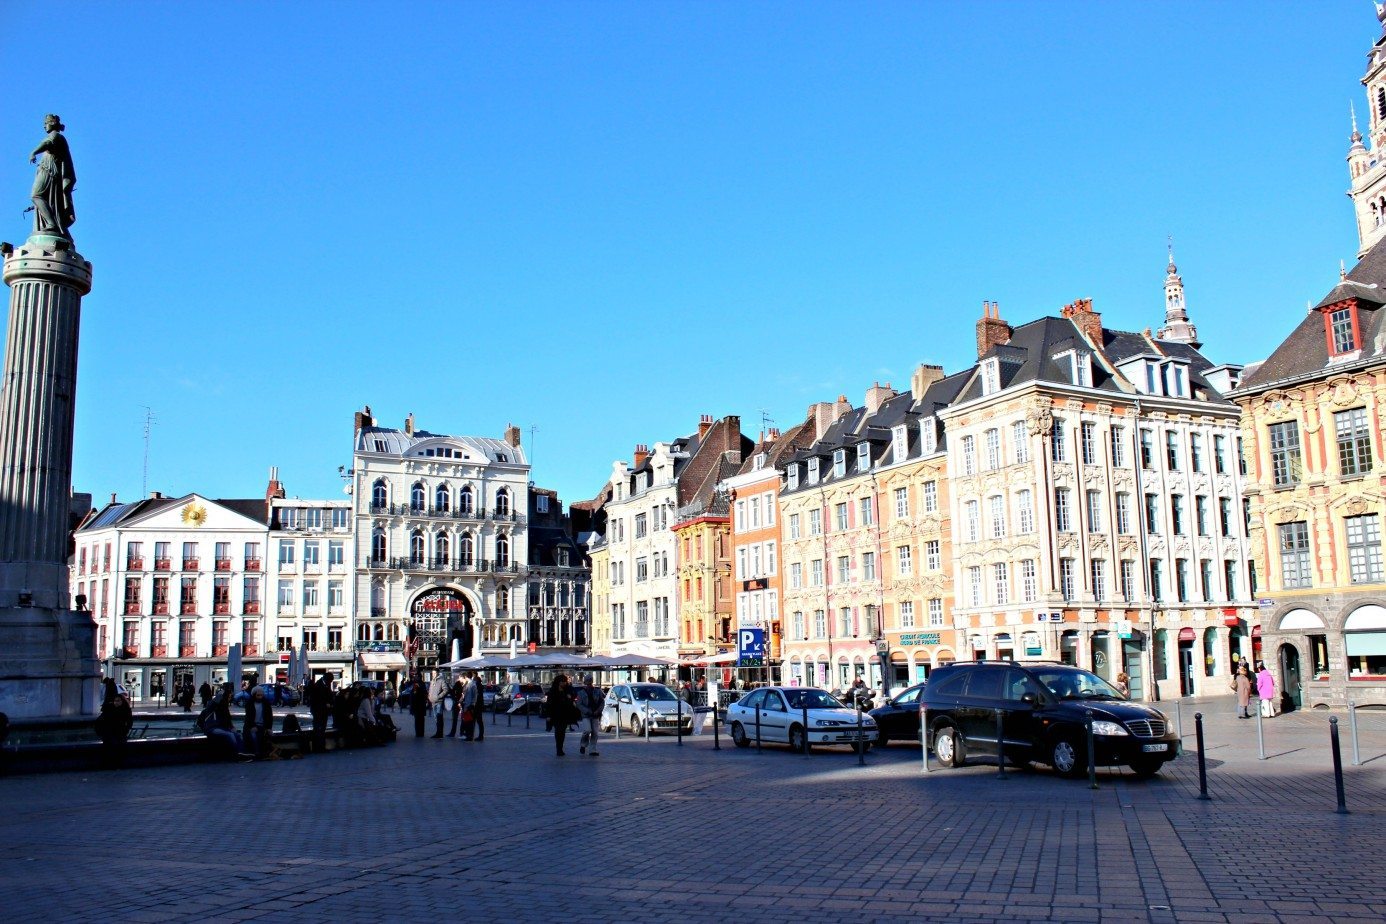 Photo Diary of Lille, France - hungryfortravels